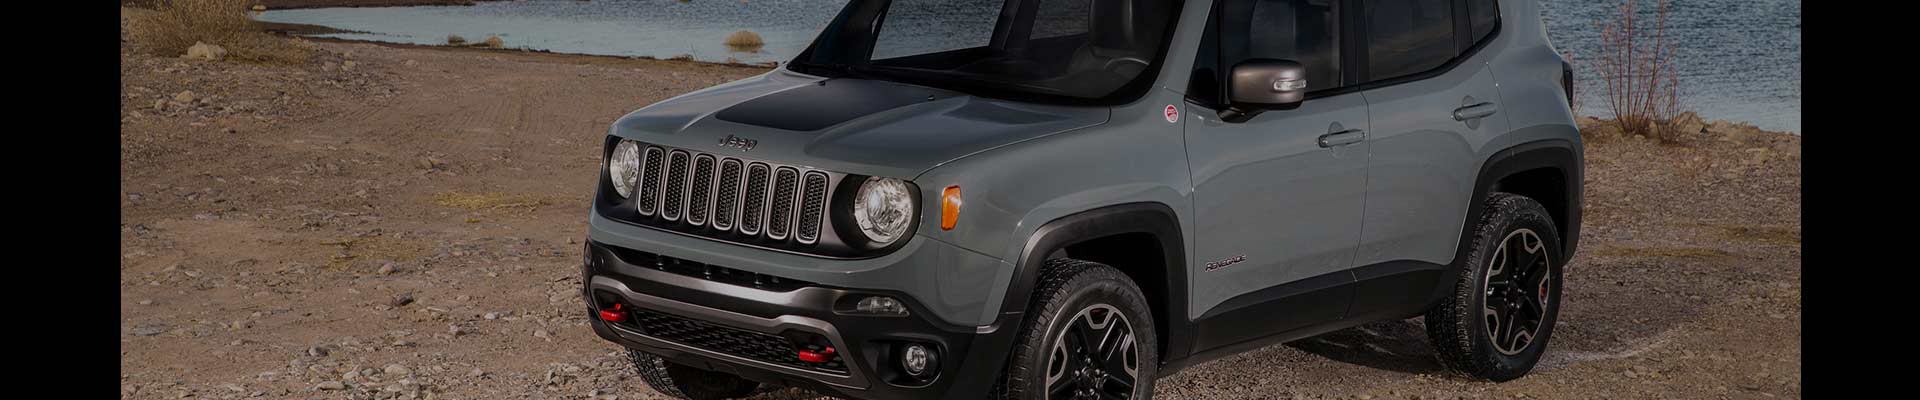 Shop Replacement and OEM 2018 Jeep Renegade Parts with Discounted Price on the Net